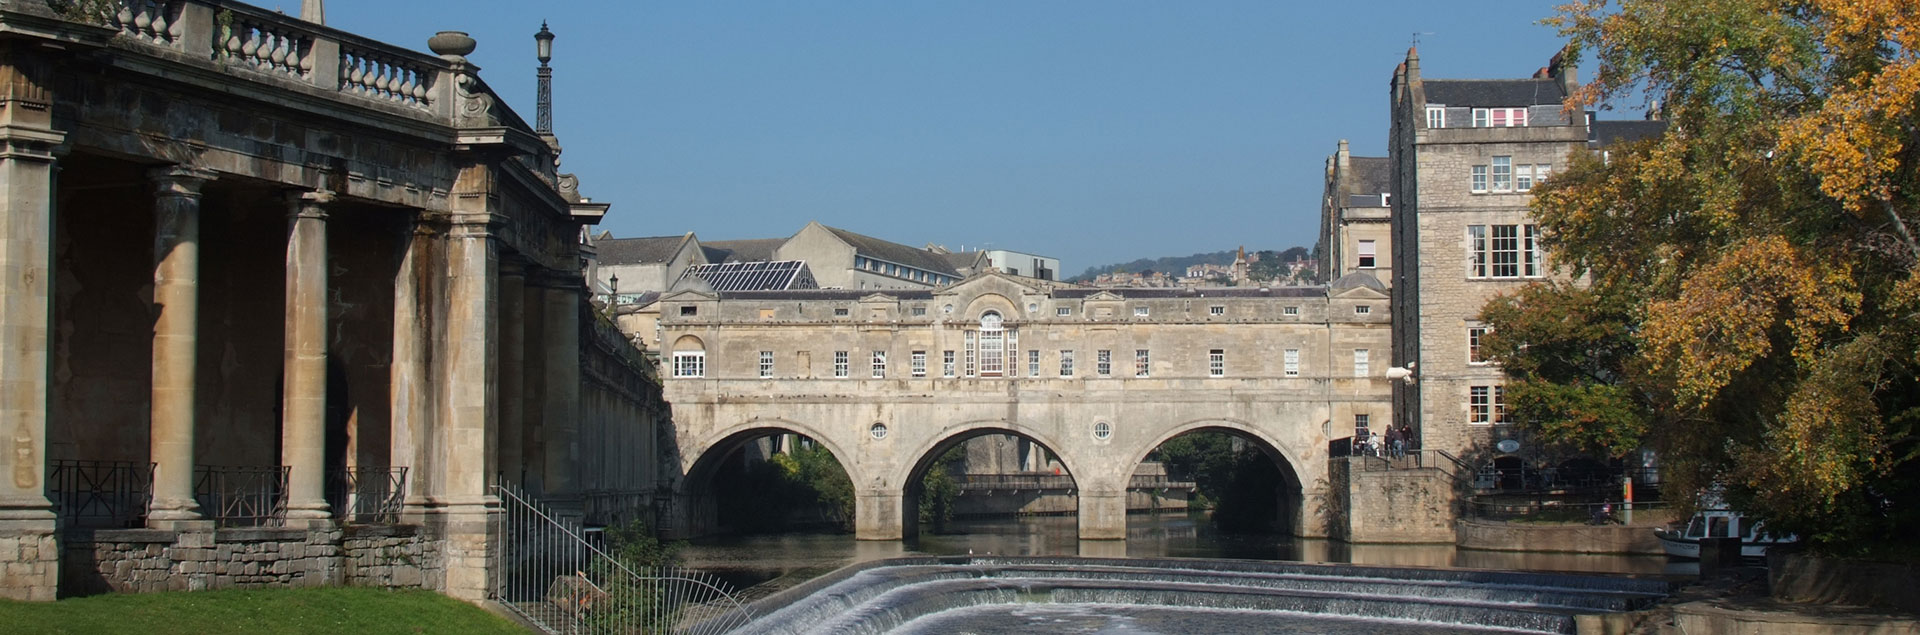 Things to do in Bath